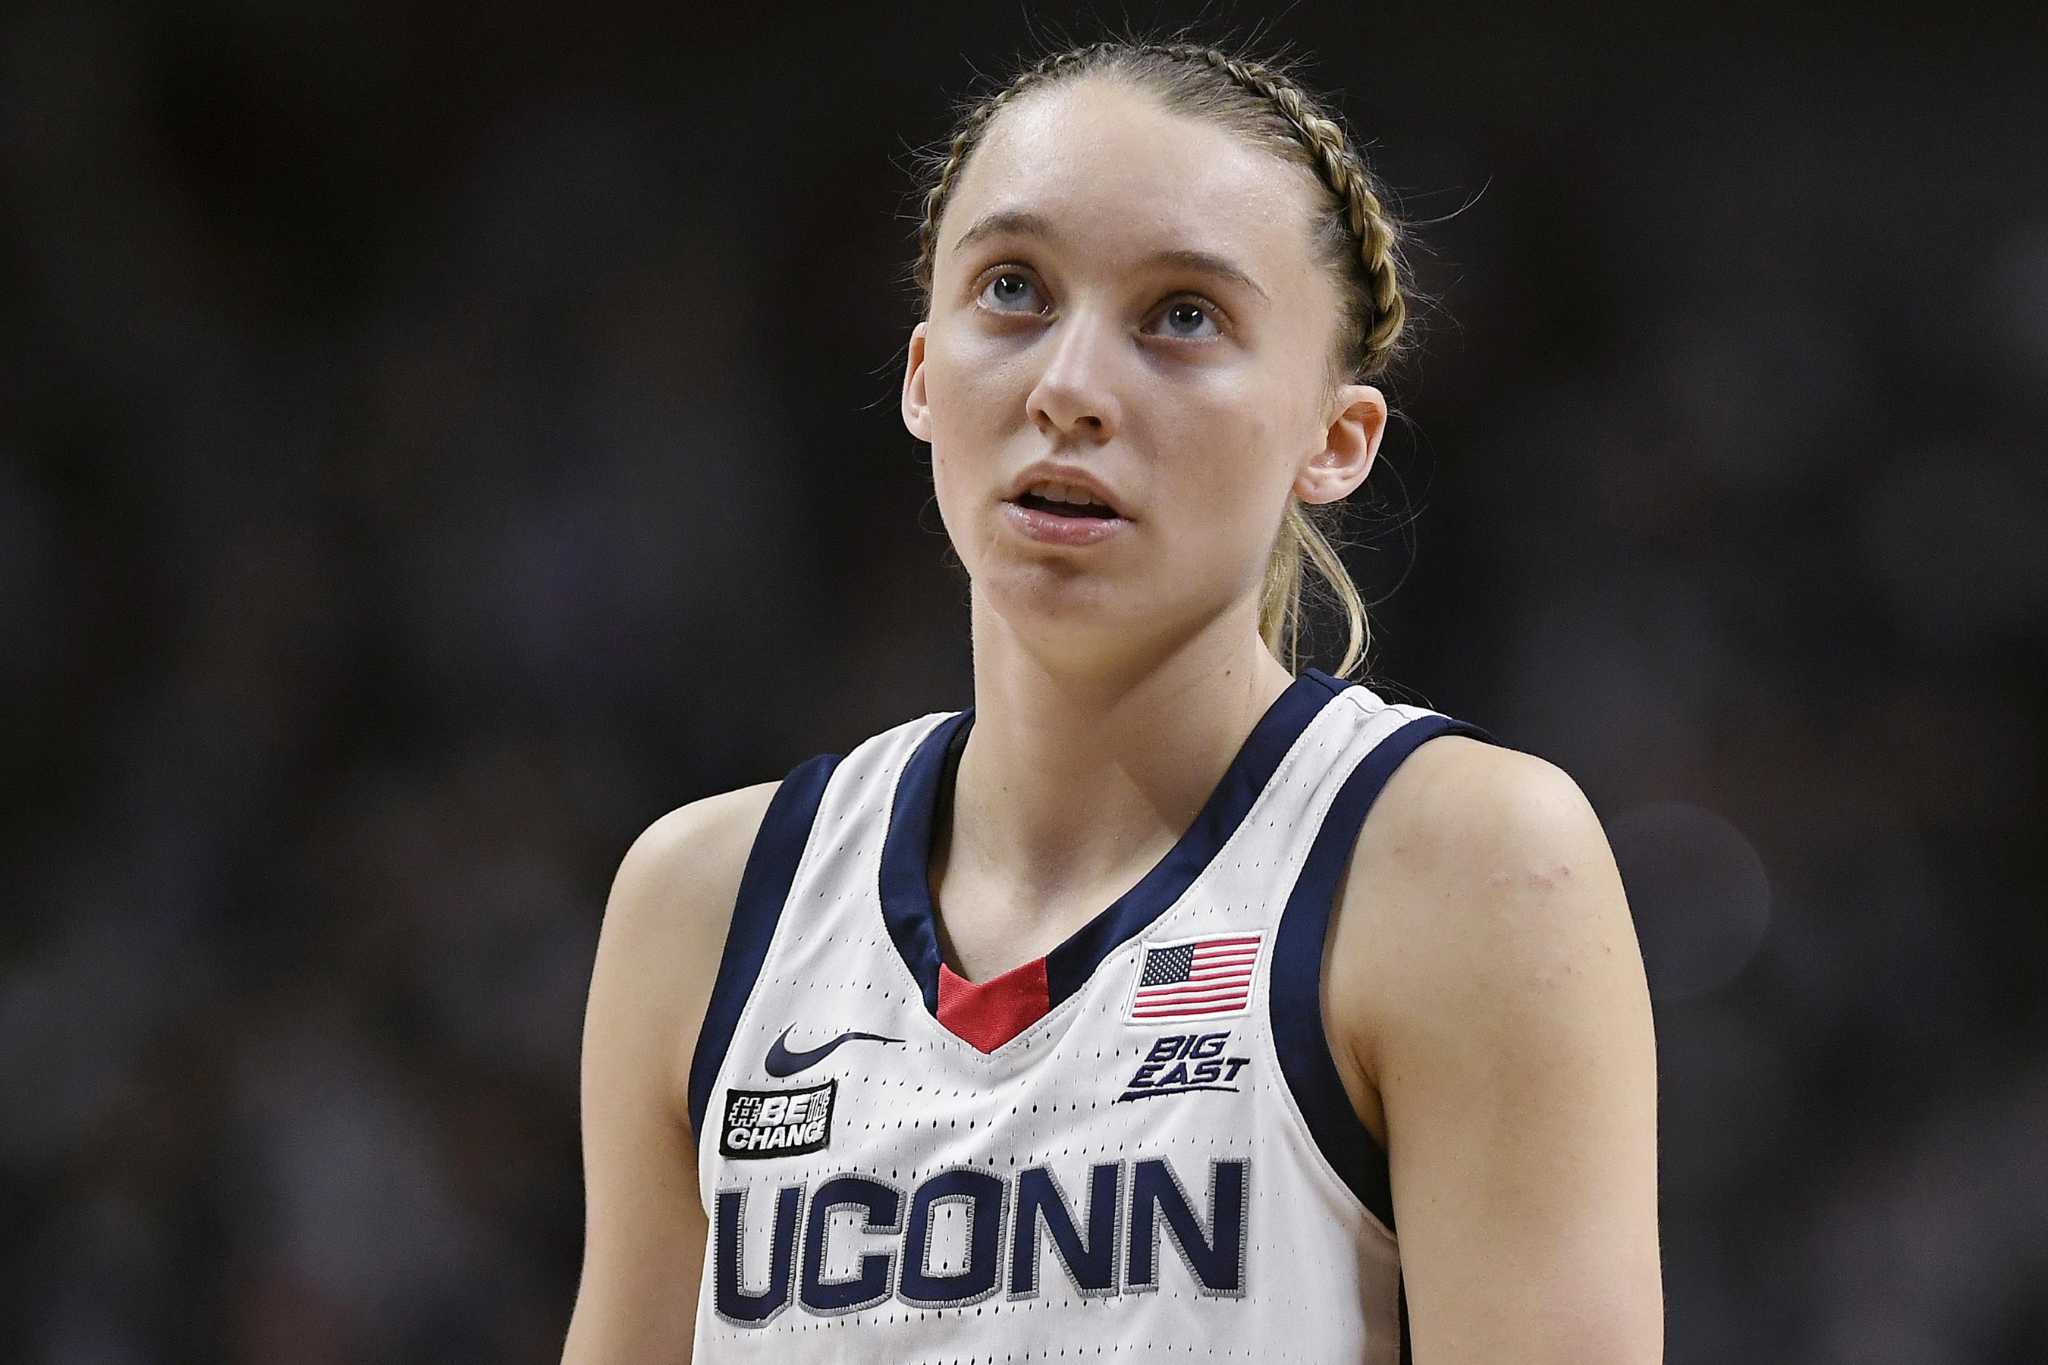 In her DNA': UConn's Bueckers already a star